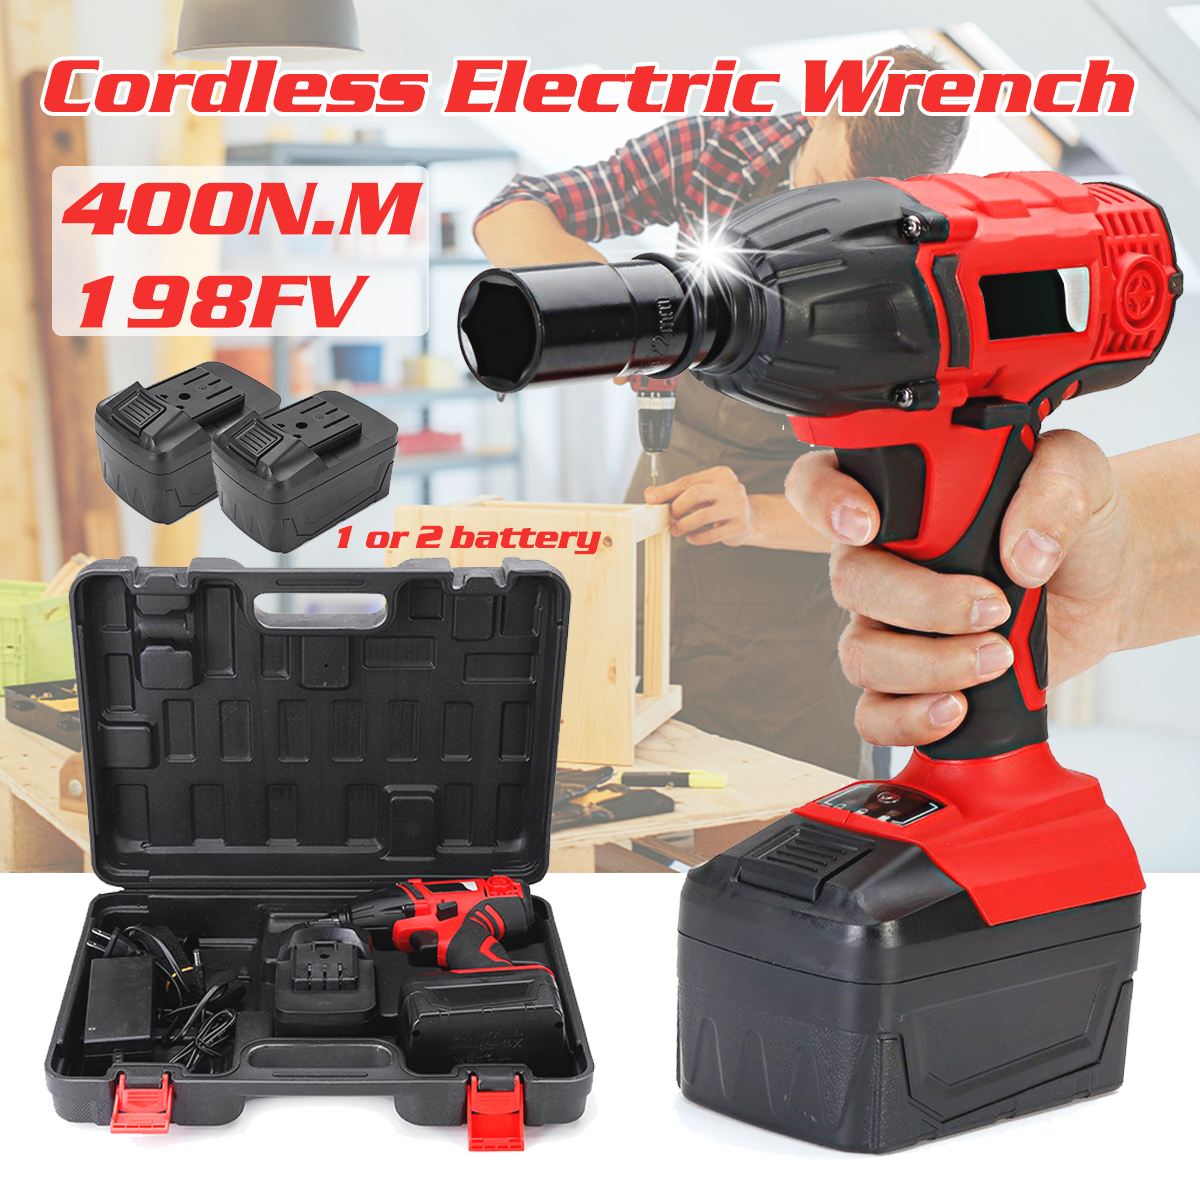 198VF-400Nm-High-Torque-Cordless-Electric-Wrench-W-1-or-2-Li-Ion-Battery-1-Charger-1435853-1